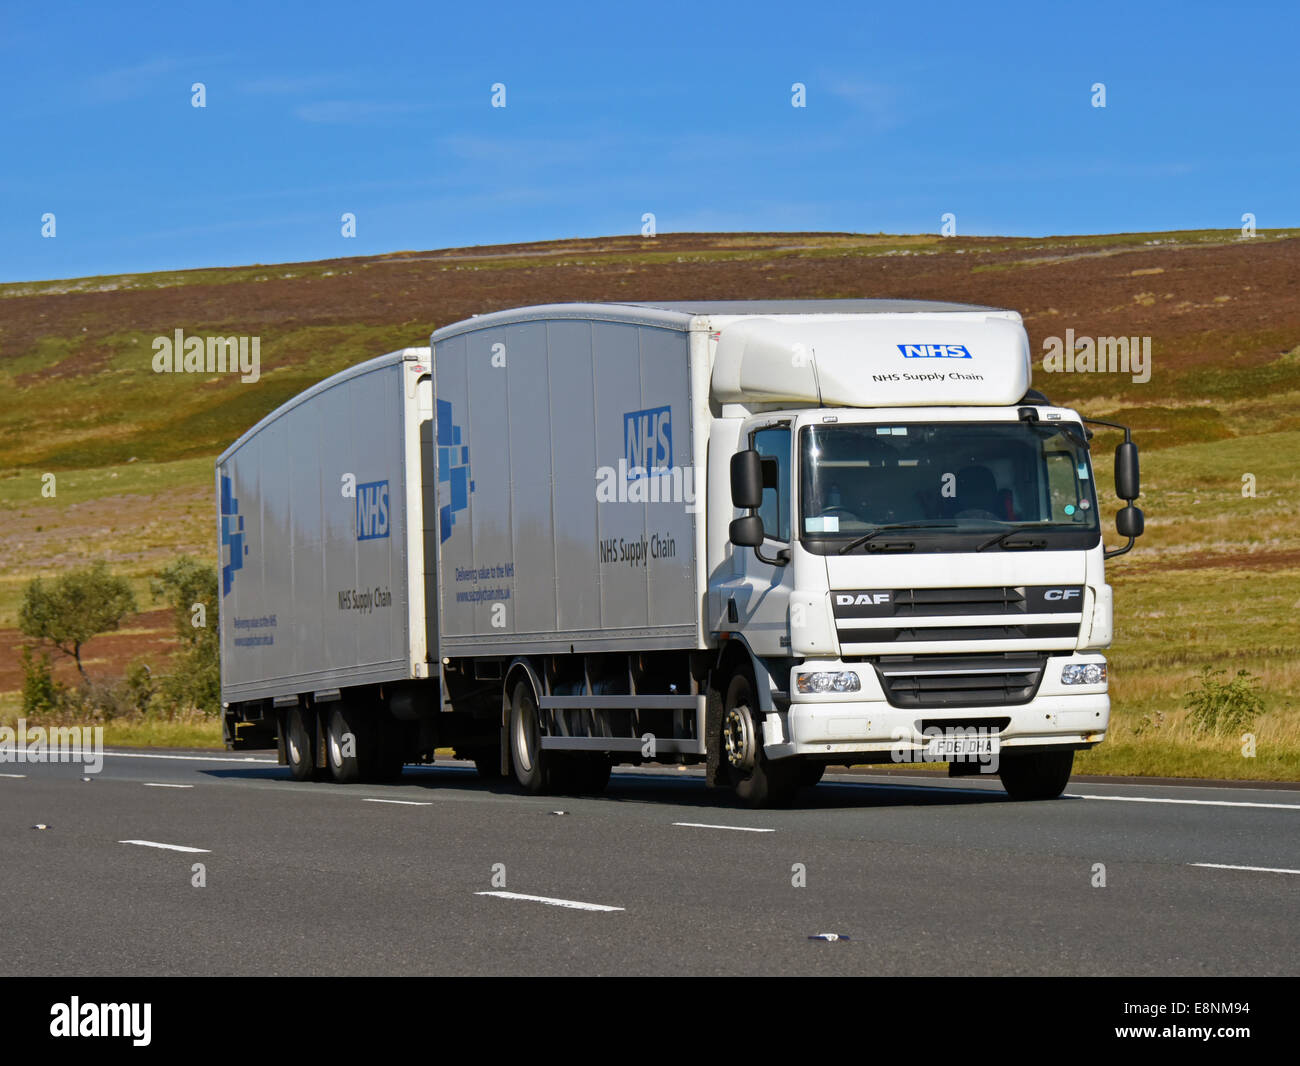 NHS Supply Train truck and trailer. M6 Motorway, southbound. Shap, Cumbria, England, United Kingdom, Europe. Stock Photo